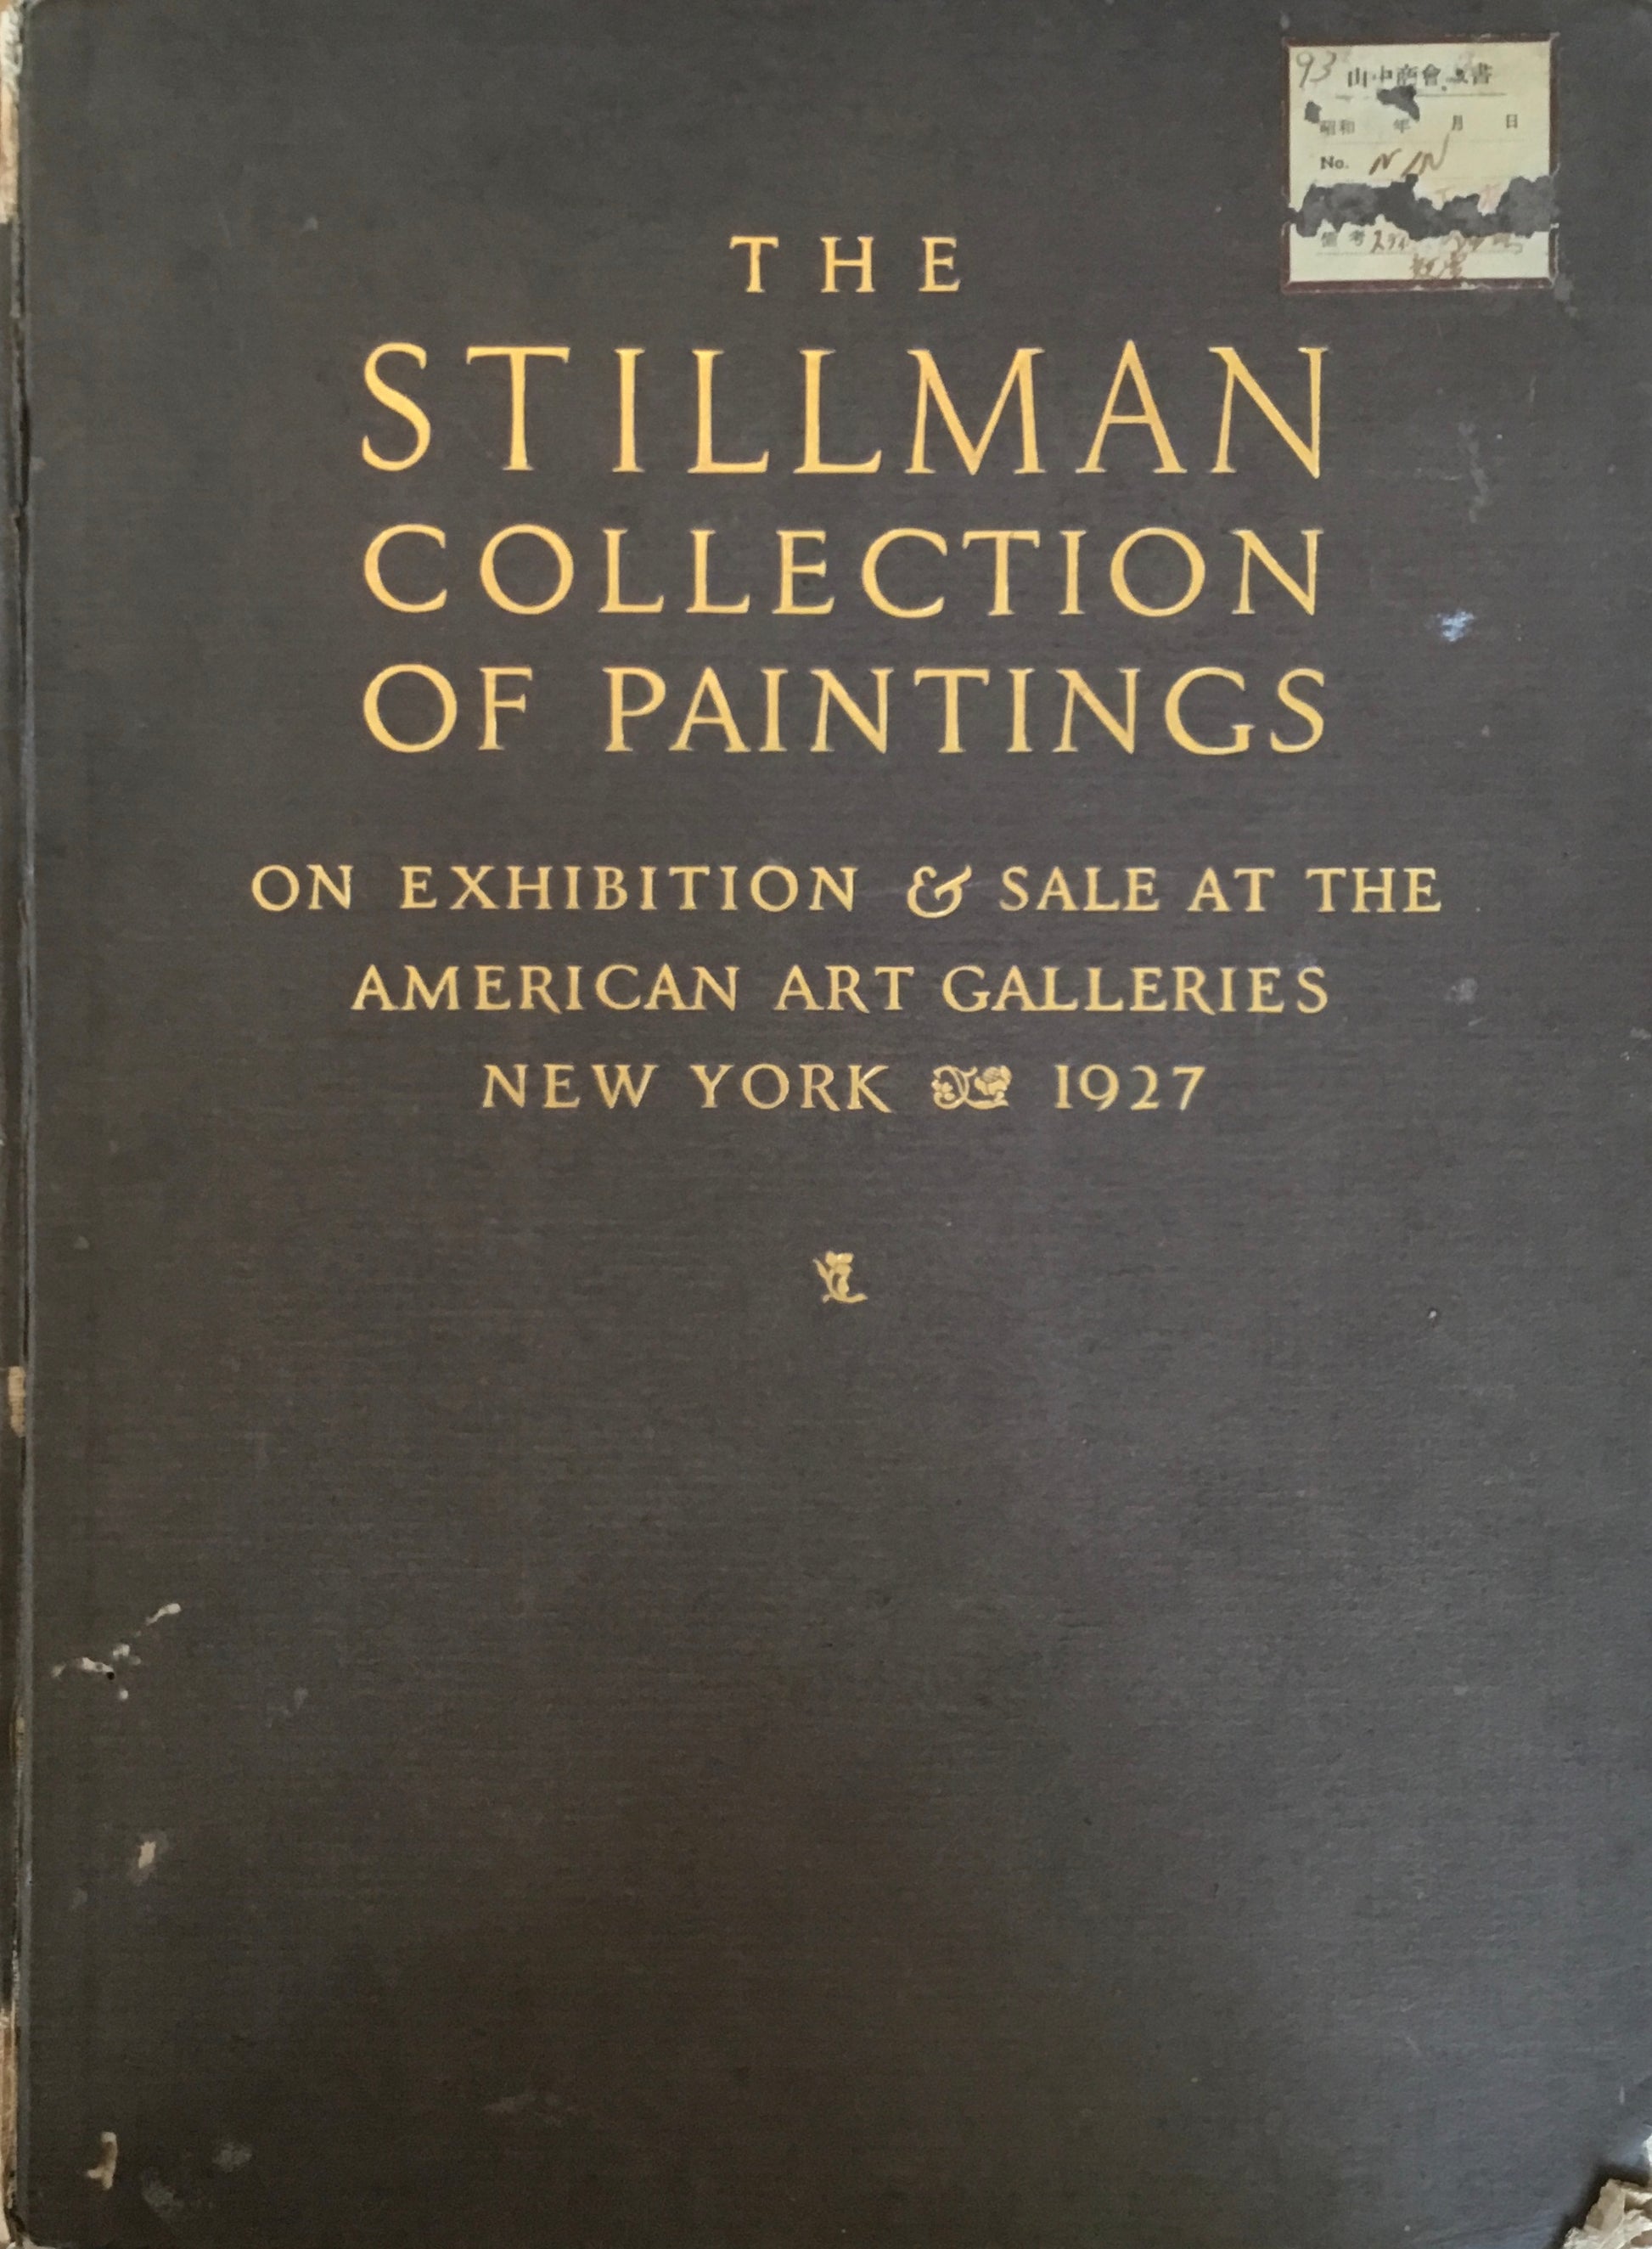 The Stillman Collection of Paintings on Exhibition&Sale at the American Art Galleries New York 1927　山中商会蔵書